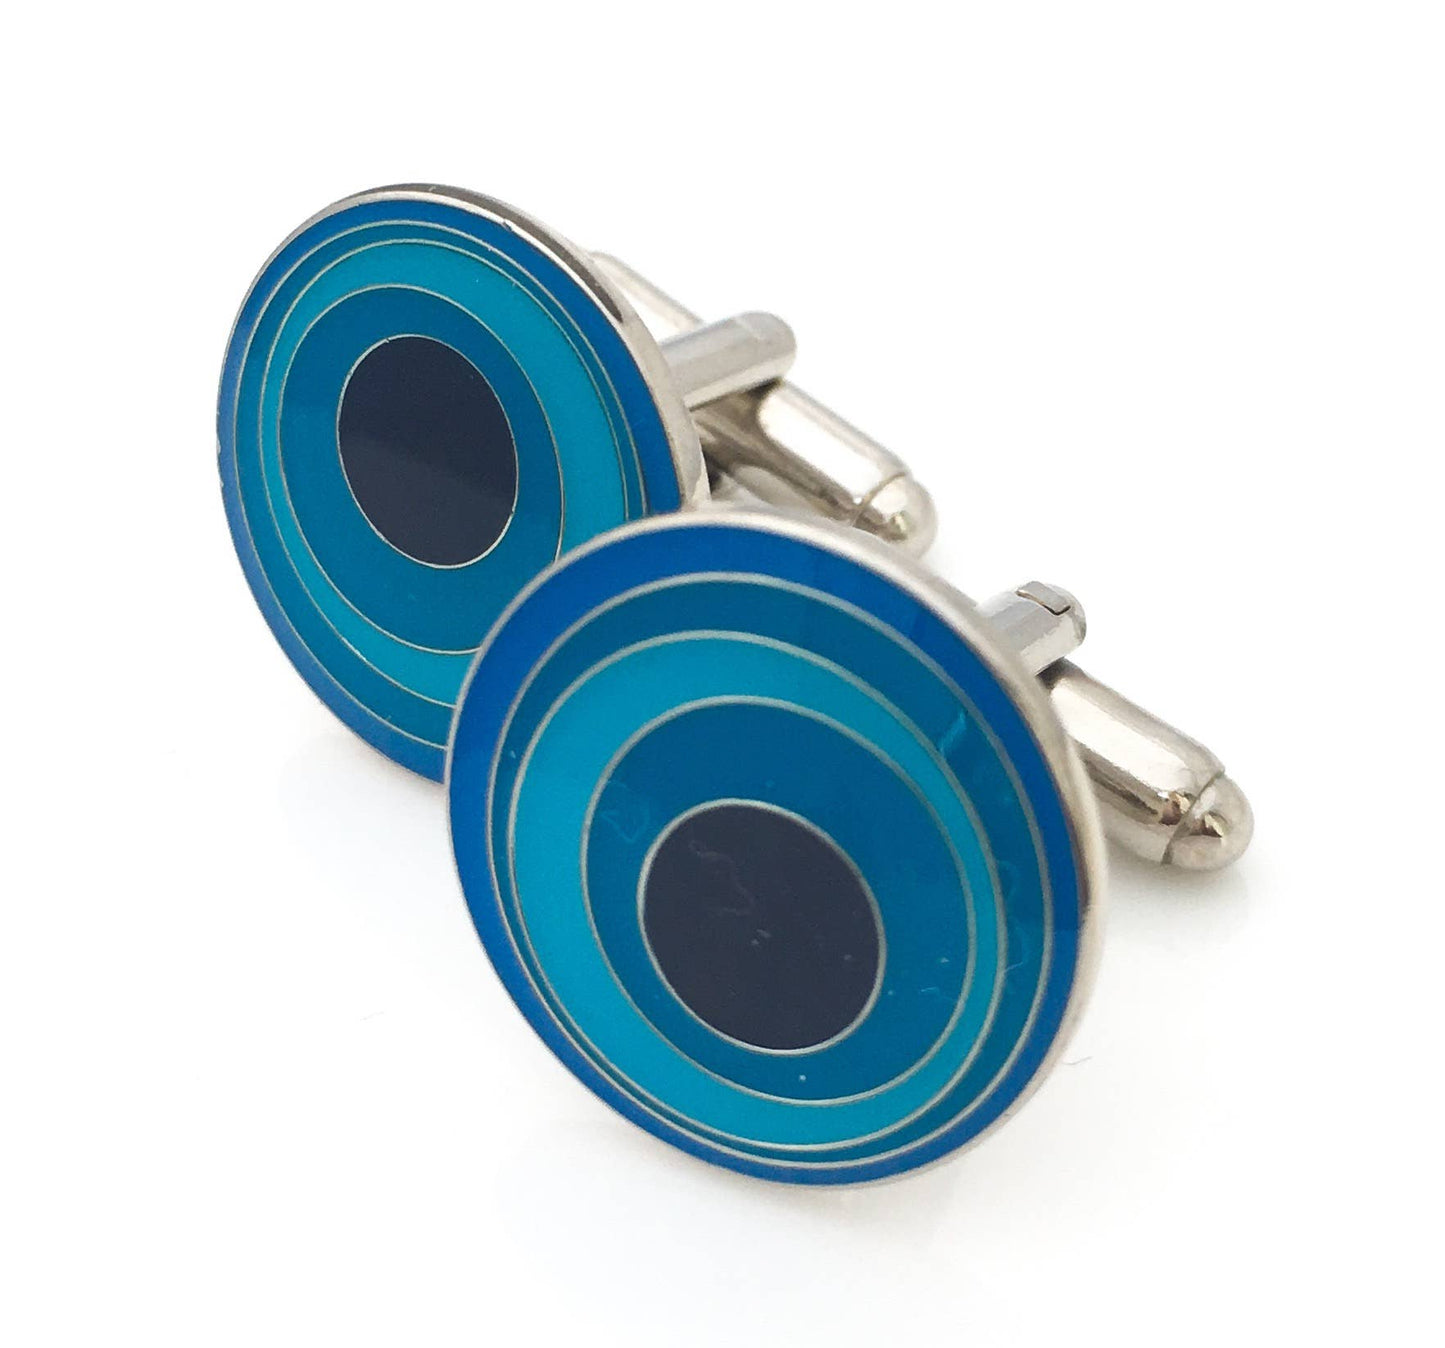 Round cufflinks with circles within circles in blues